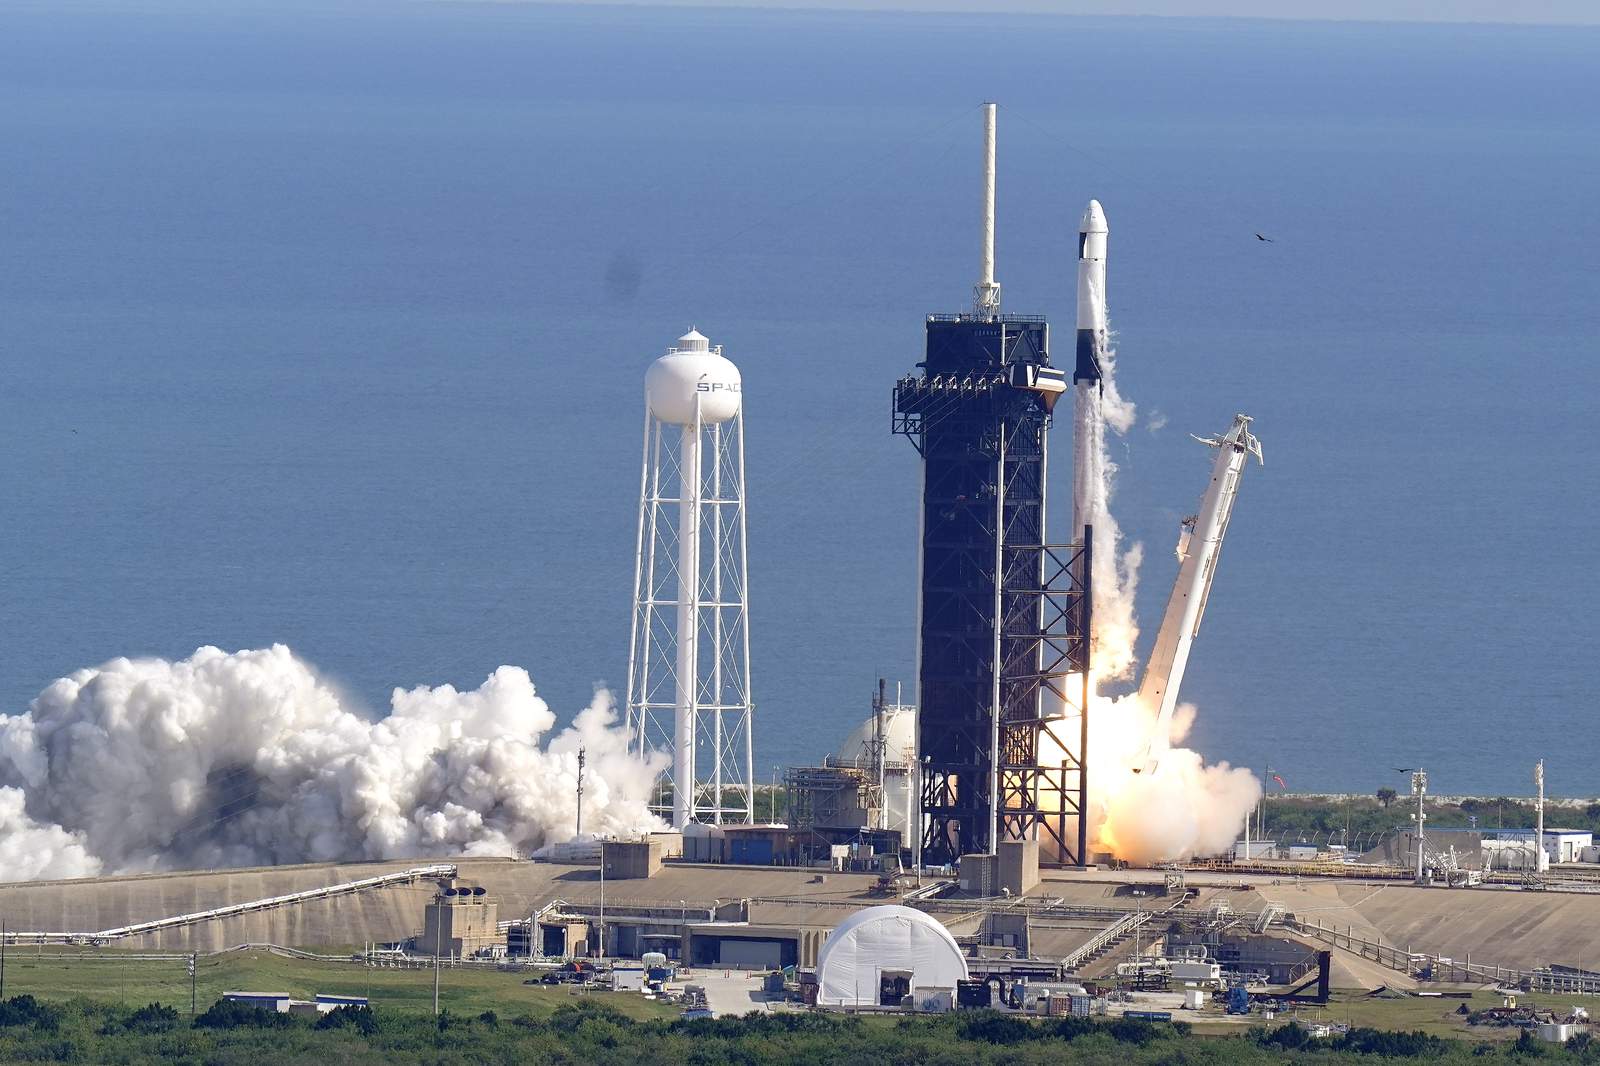 WATCH: NASA, SpaceX launch CRS-21 Dragon cargo spacecraft to International Space Station